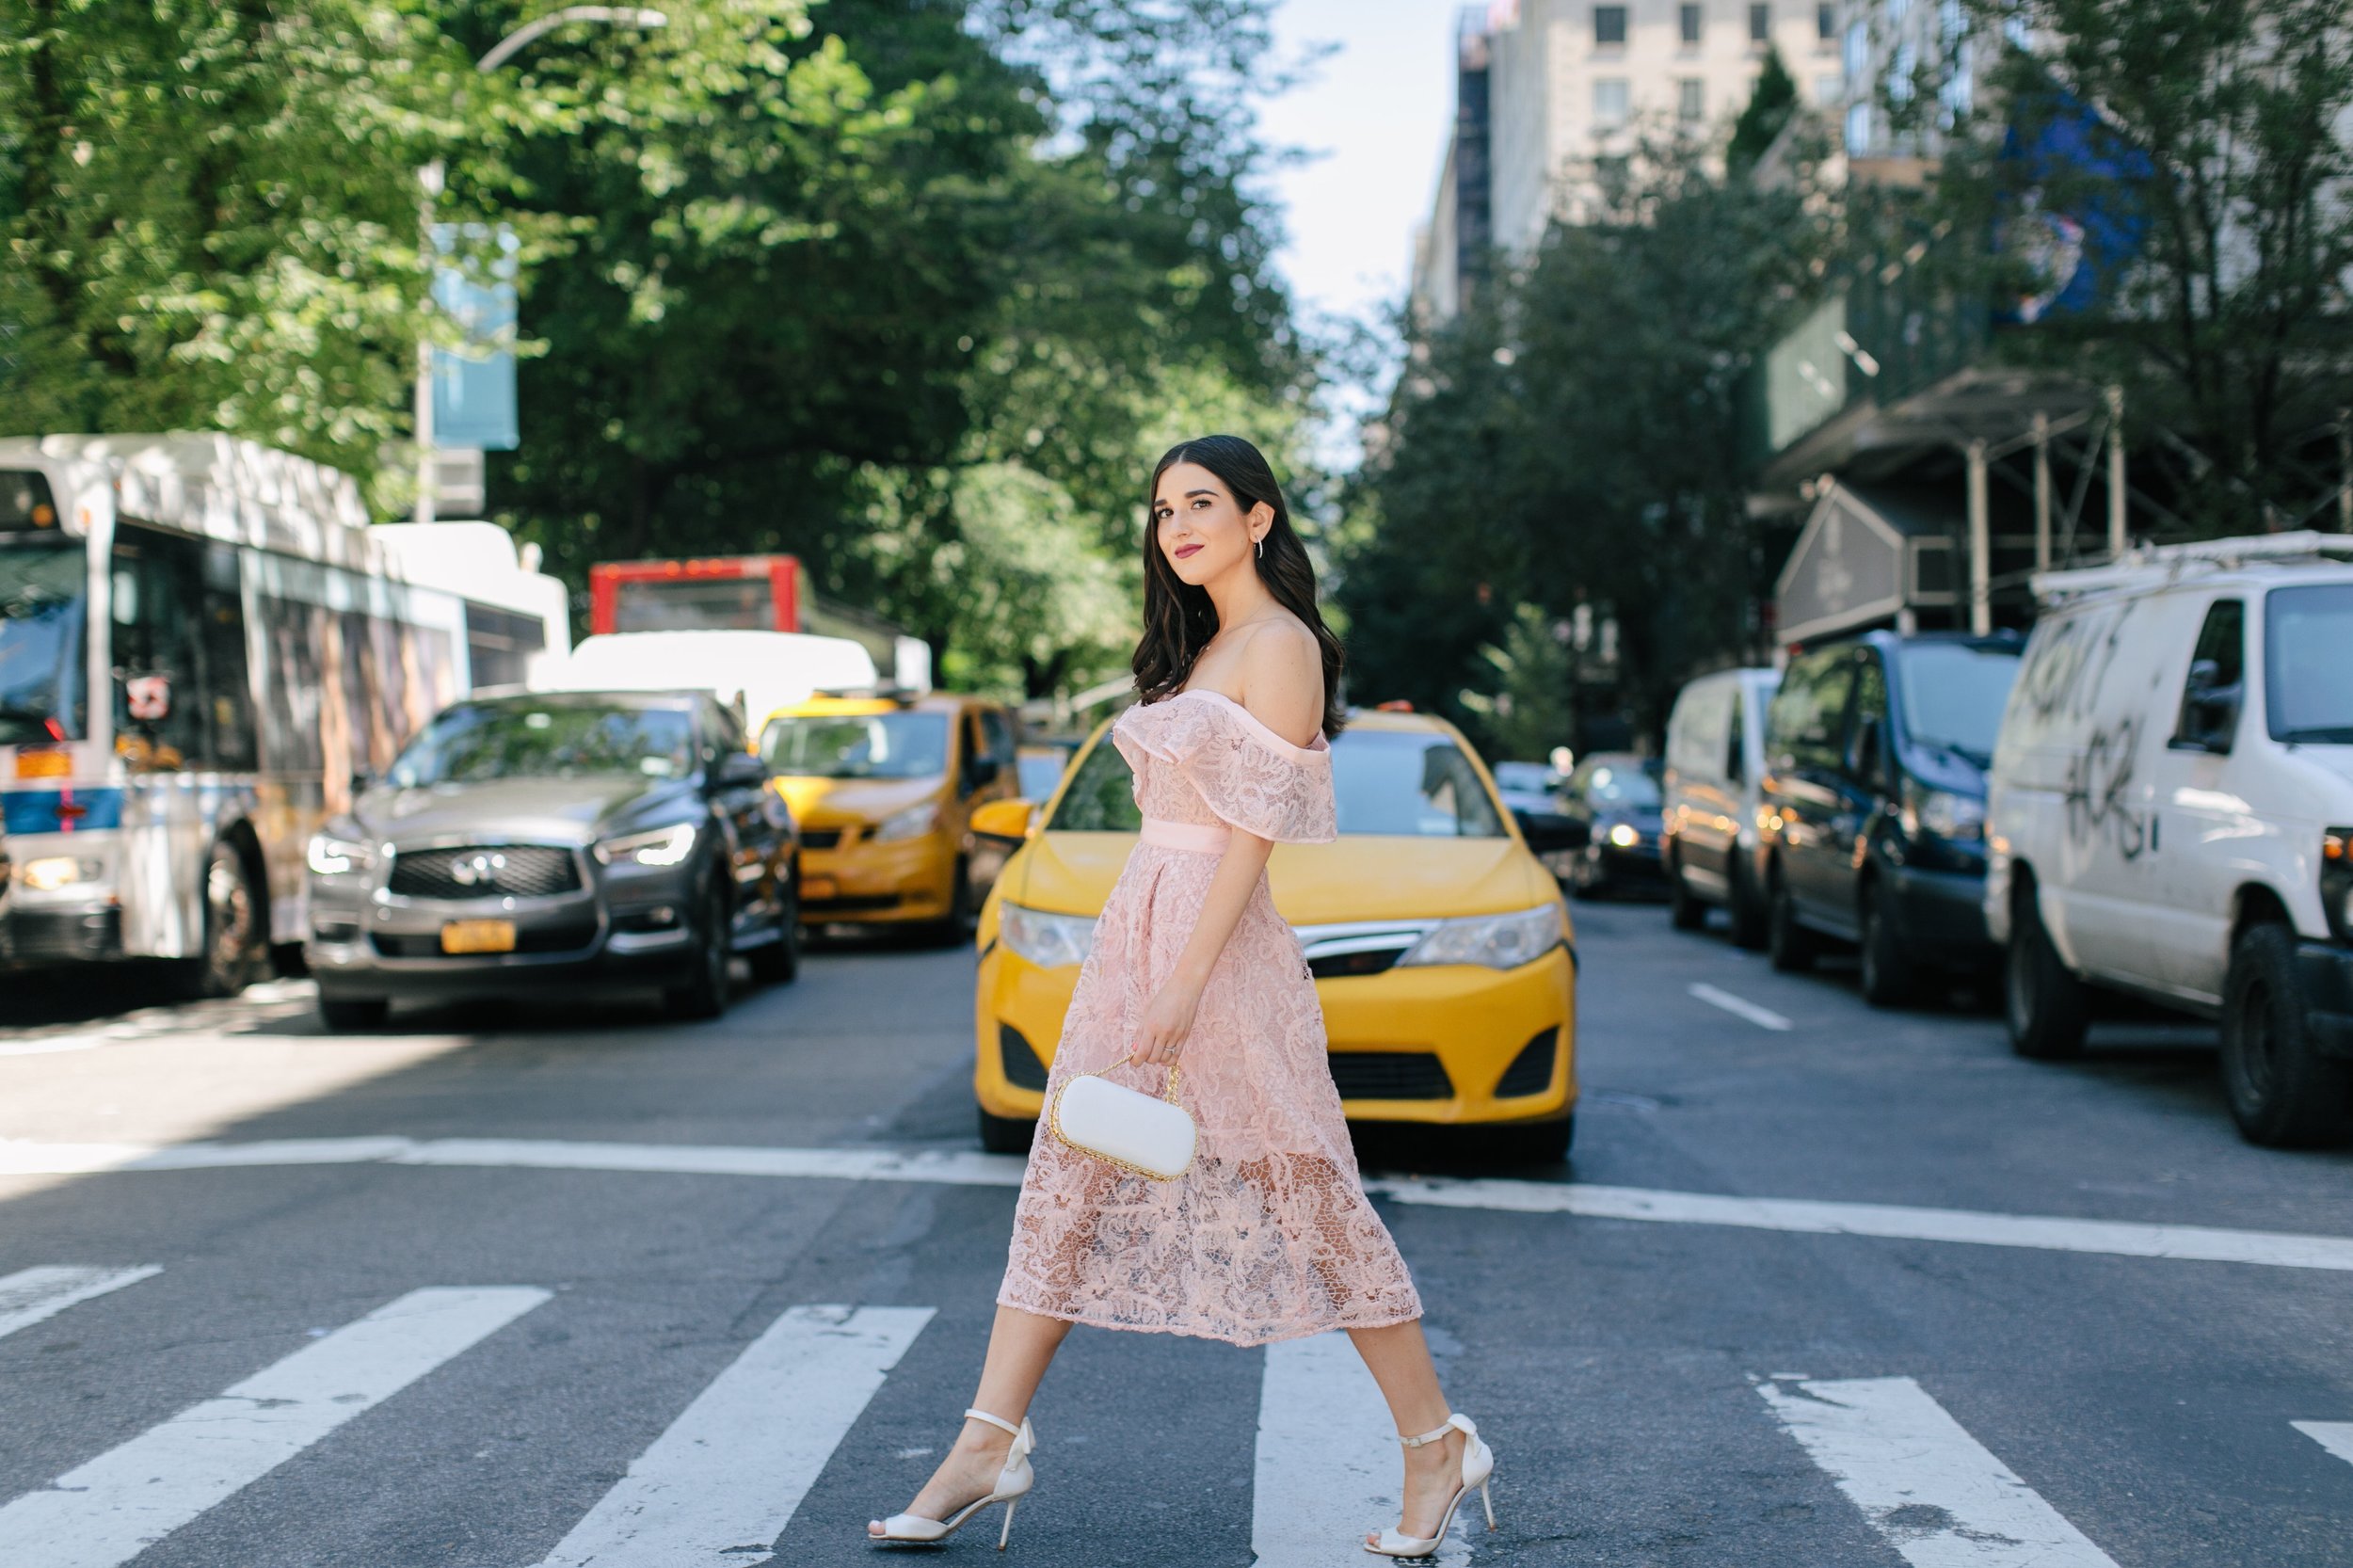 A New Perspective On Instagram Jealousy Pink Lace Dress Ivory Bow Heels Esther Santer Fashion Blog NYC Street Style Blogger Outfit OOTD Trendy White Clutch Self Portrait Designer Kate Spade Wedding Shoes Fancy Elegant Feminine Shopping Bag Wear Formal.jpg